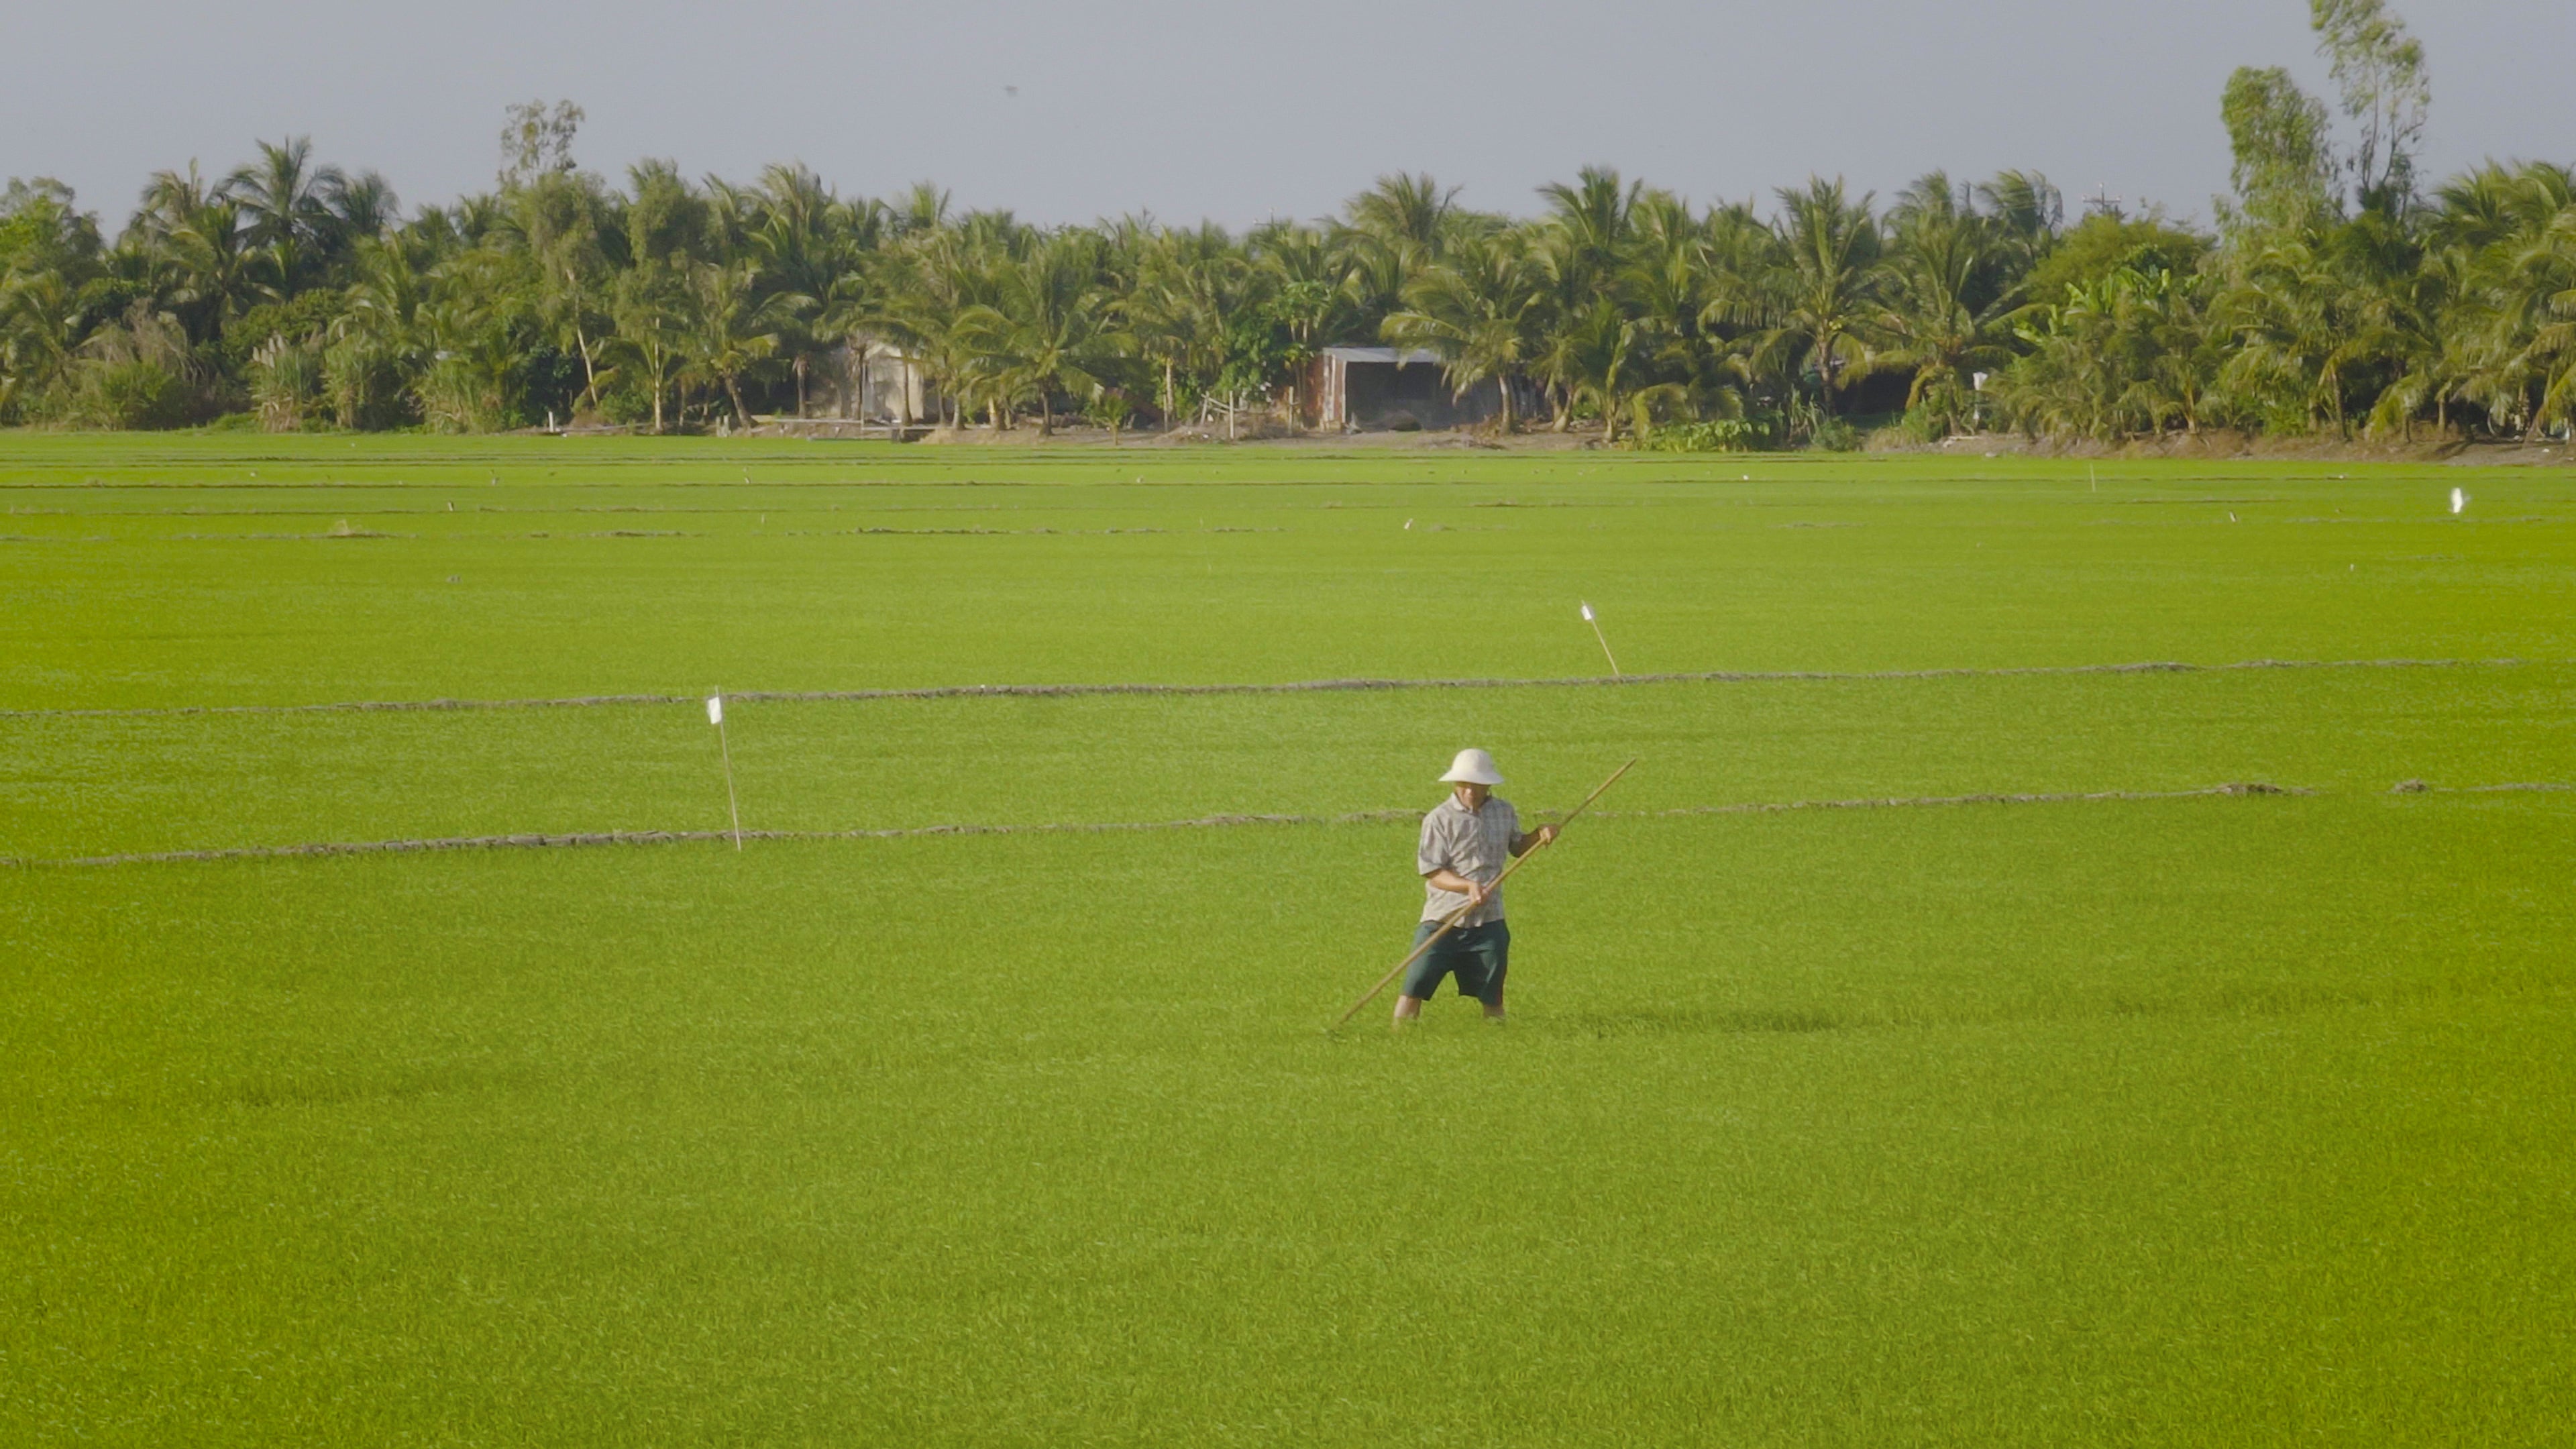 Precision agriculture for smallholder farmers in Vietnam: How the Internet of Things helps smallholder paddy farmers use water more efficiently